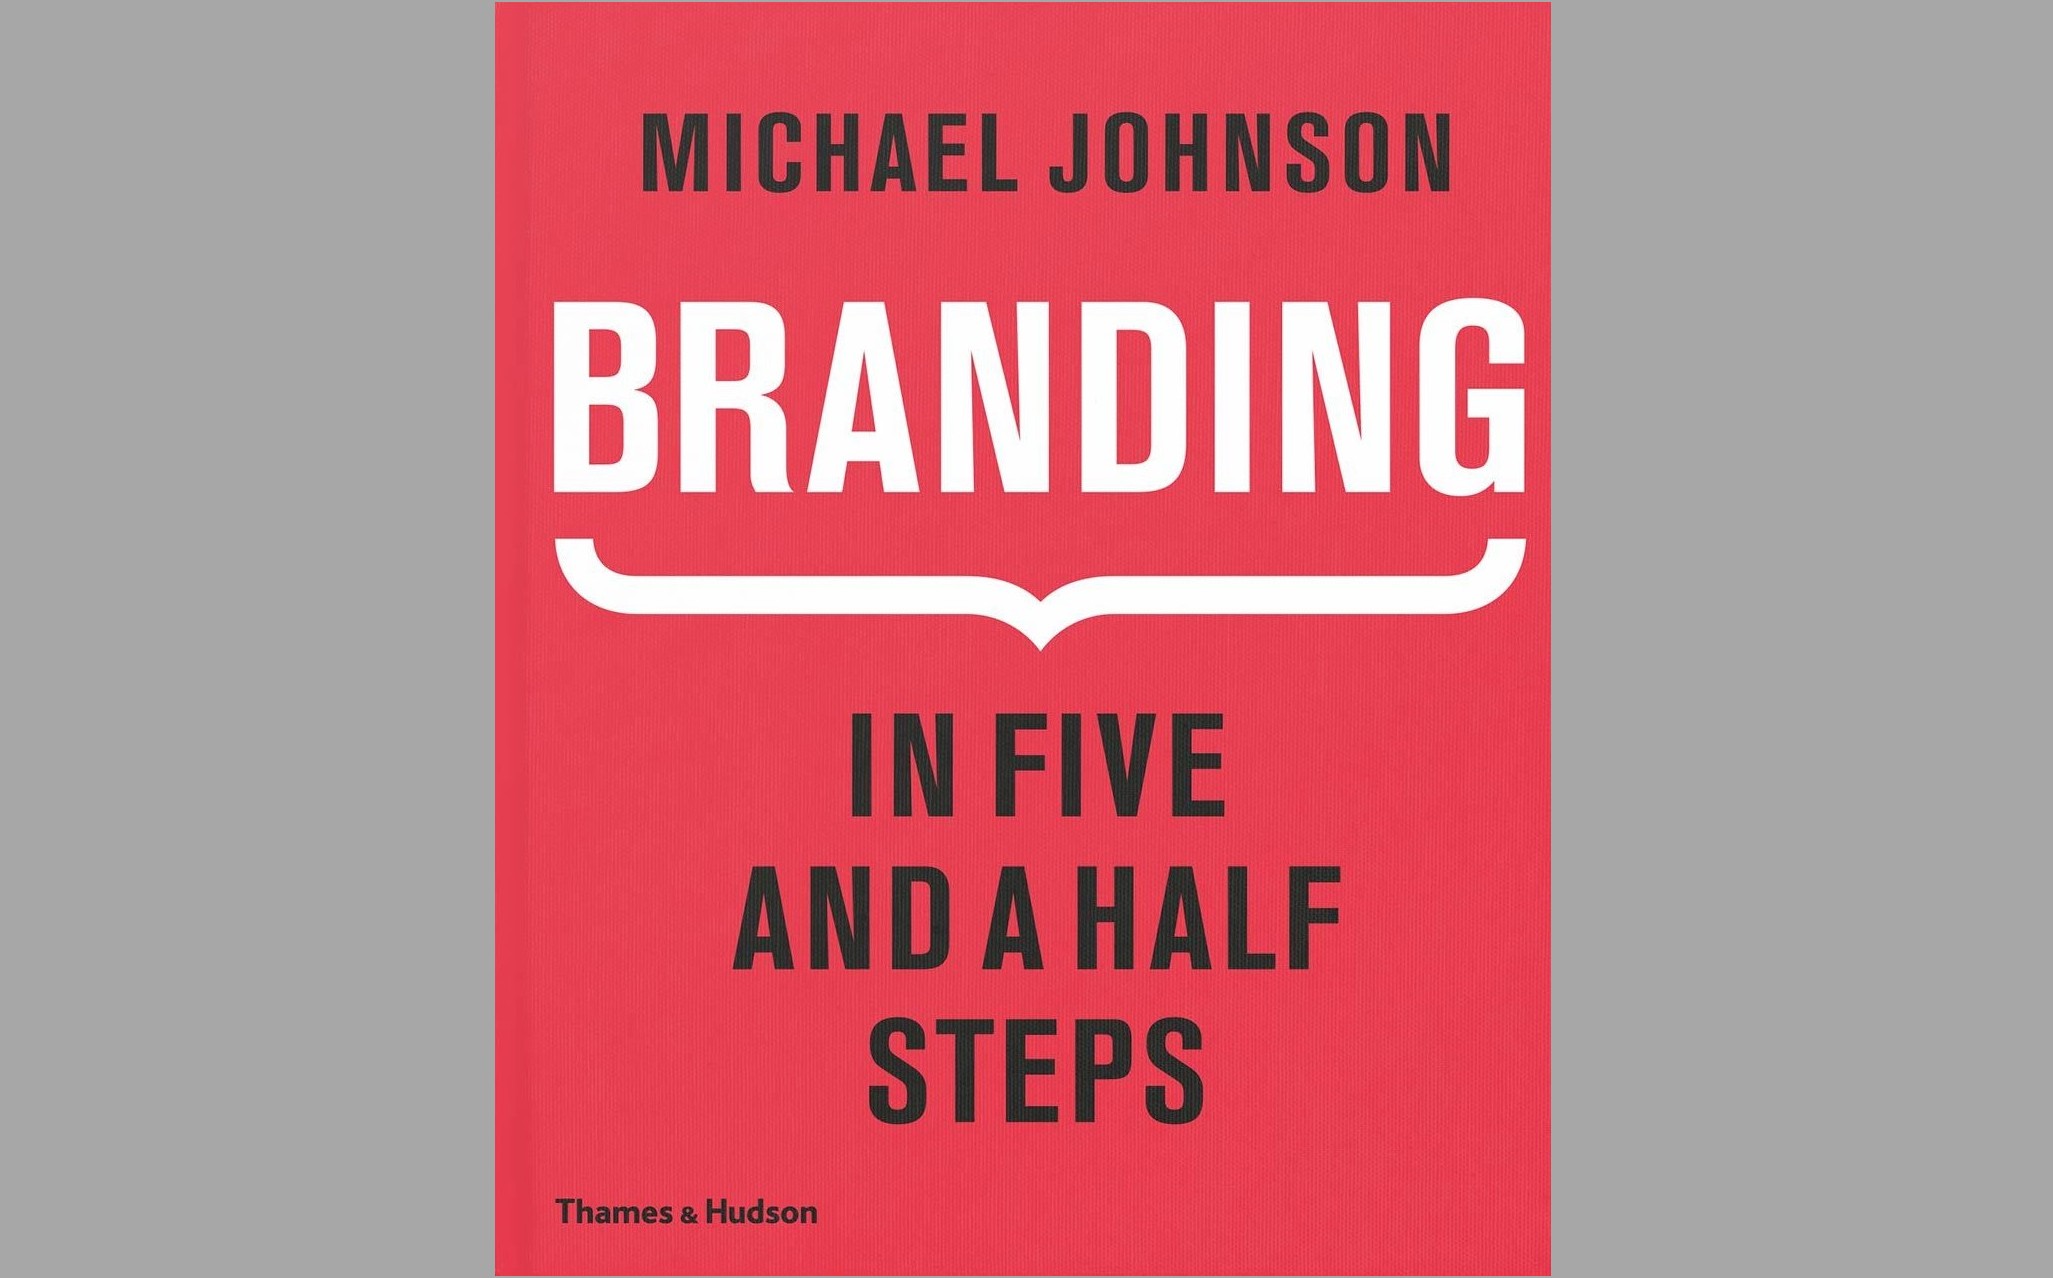 Cover shot of one of the best graphic design books: Branding in Five and a Half Steps